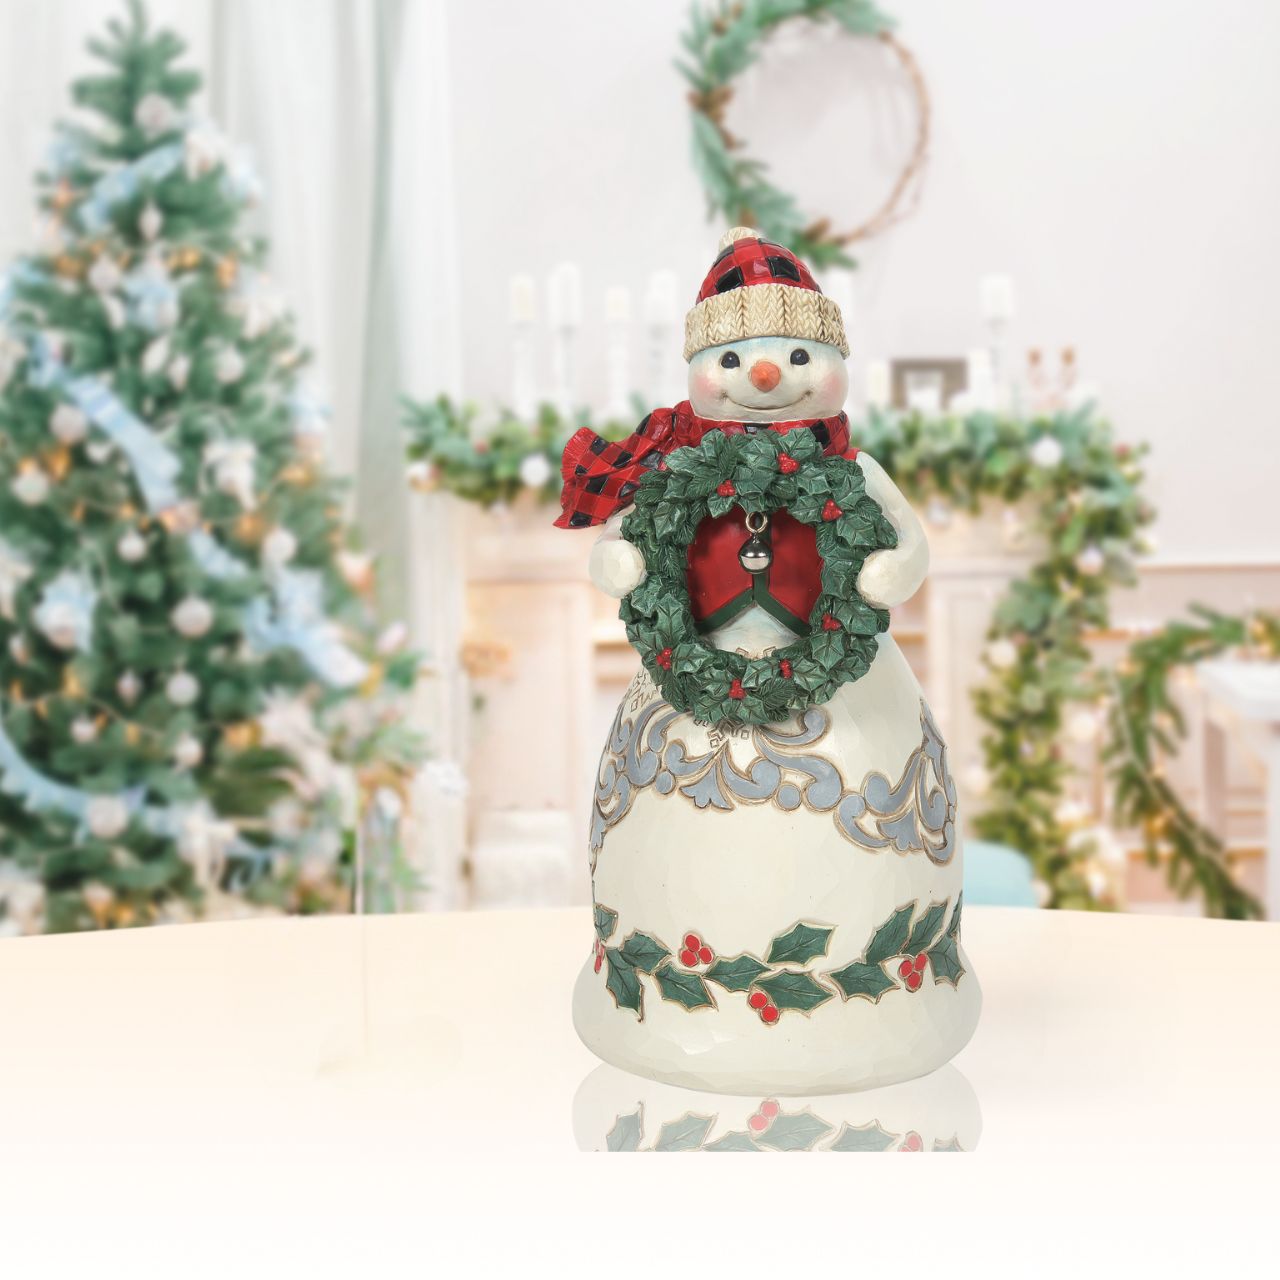 Heartwood Creek Highland Glen Mr Snowman Figurine  Designed by award winning artist Jim Shore as part of the Heartwood Creek Highland Glen Collection, hand crafted using high quality cast stone and hand painted, this festive Snowman is perfect for the Christmas season.